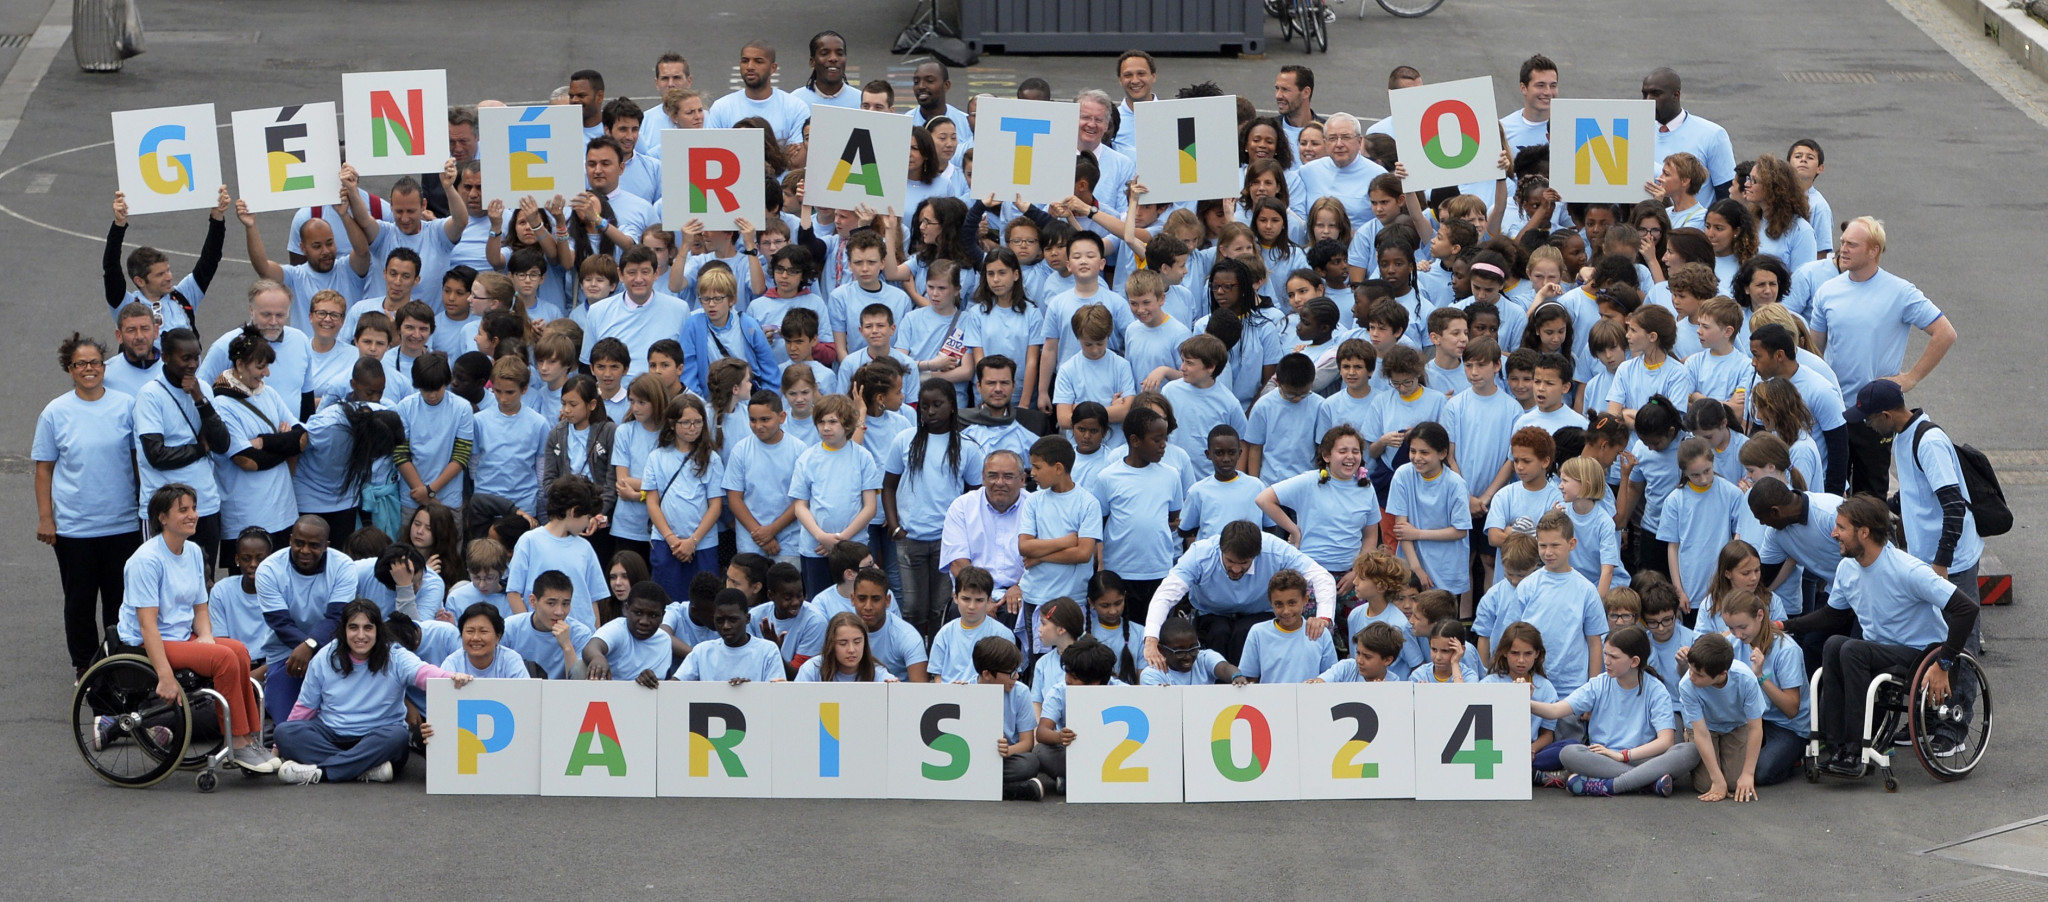 Paris 2024 has announced a partnership with ANESTAPS as part of the Generation 2024 programme ©Getty Images